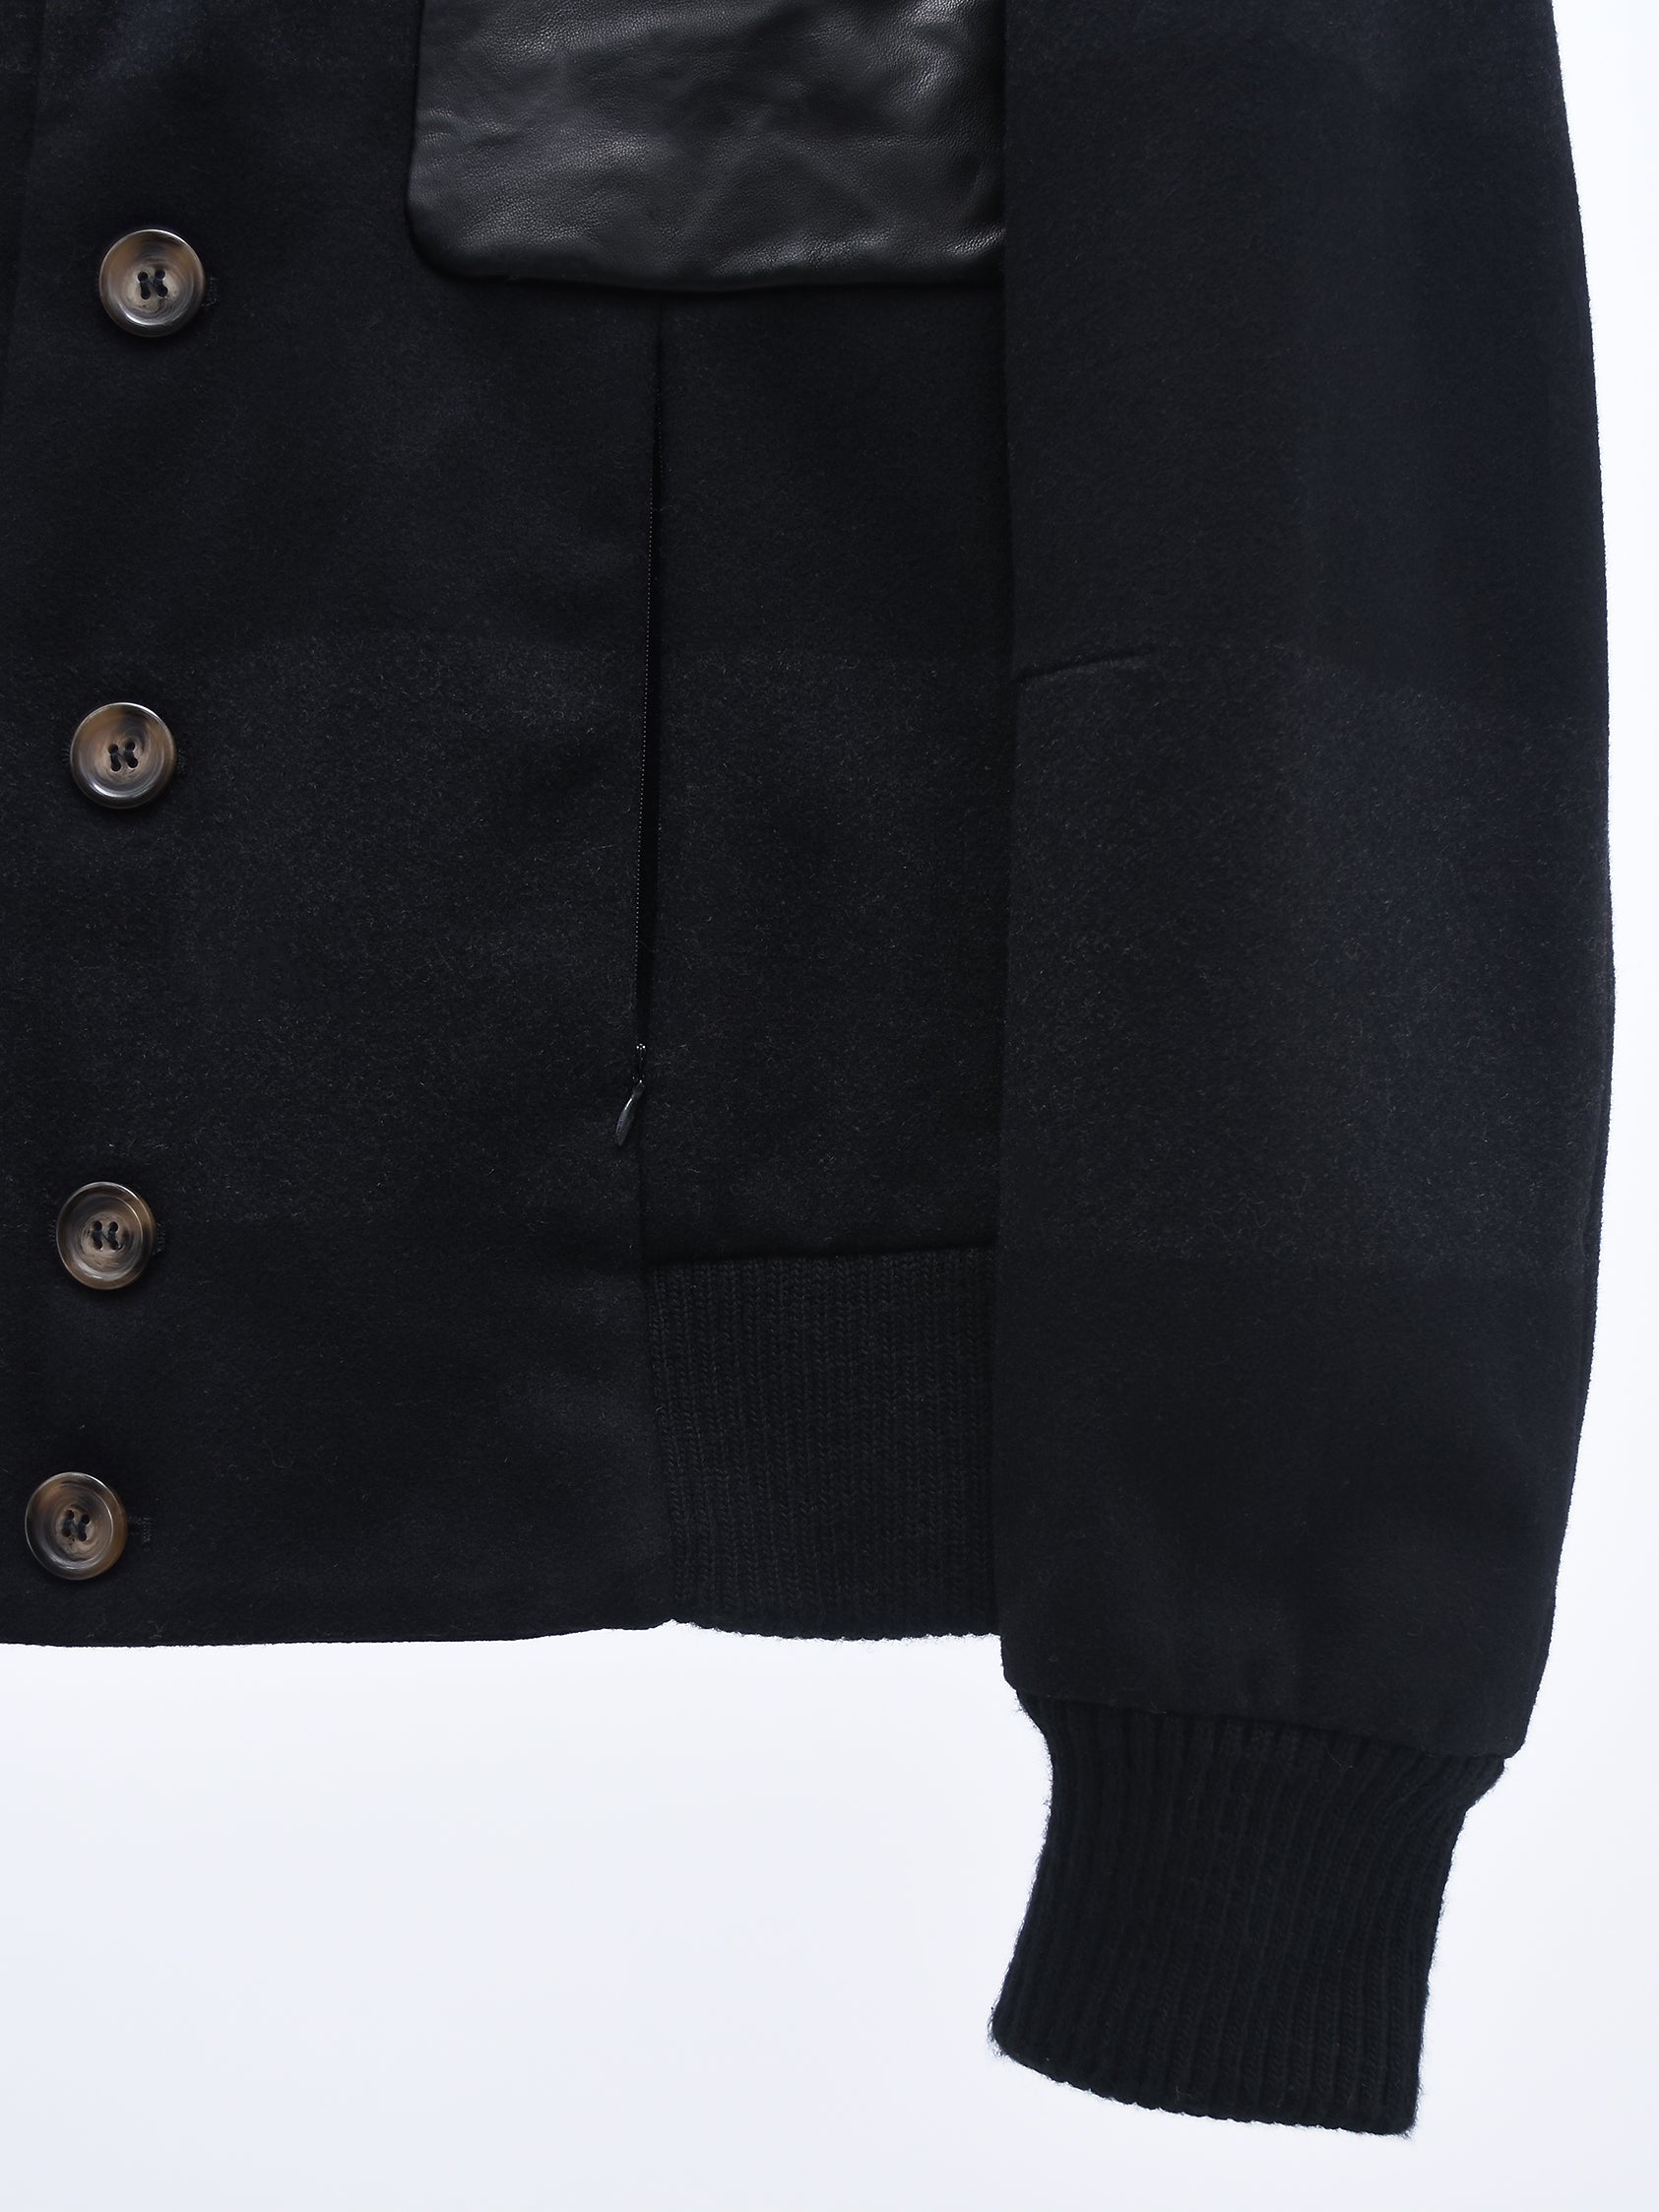 THE TUBE BLACK JACKET WITH PAPER LEATHER DETAILING